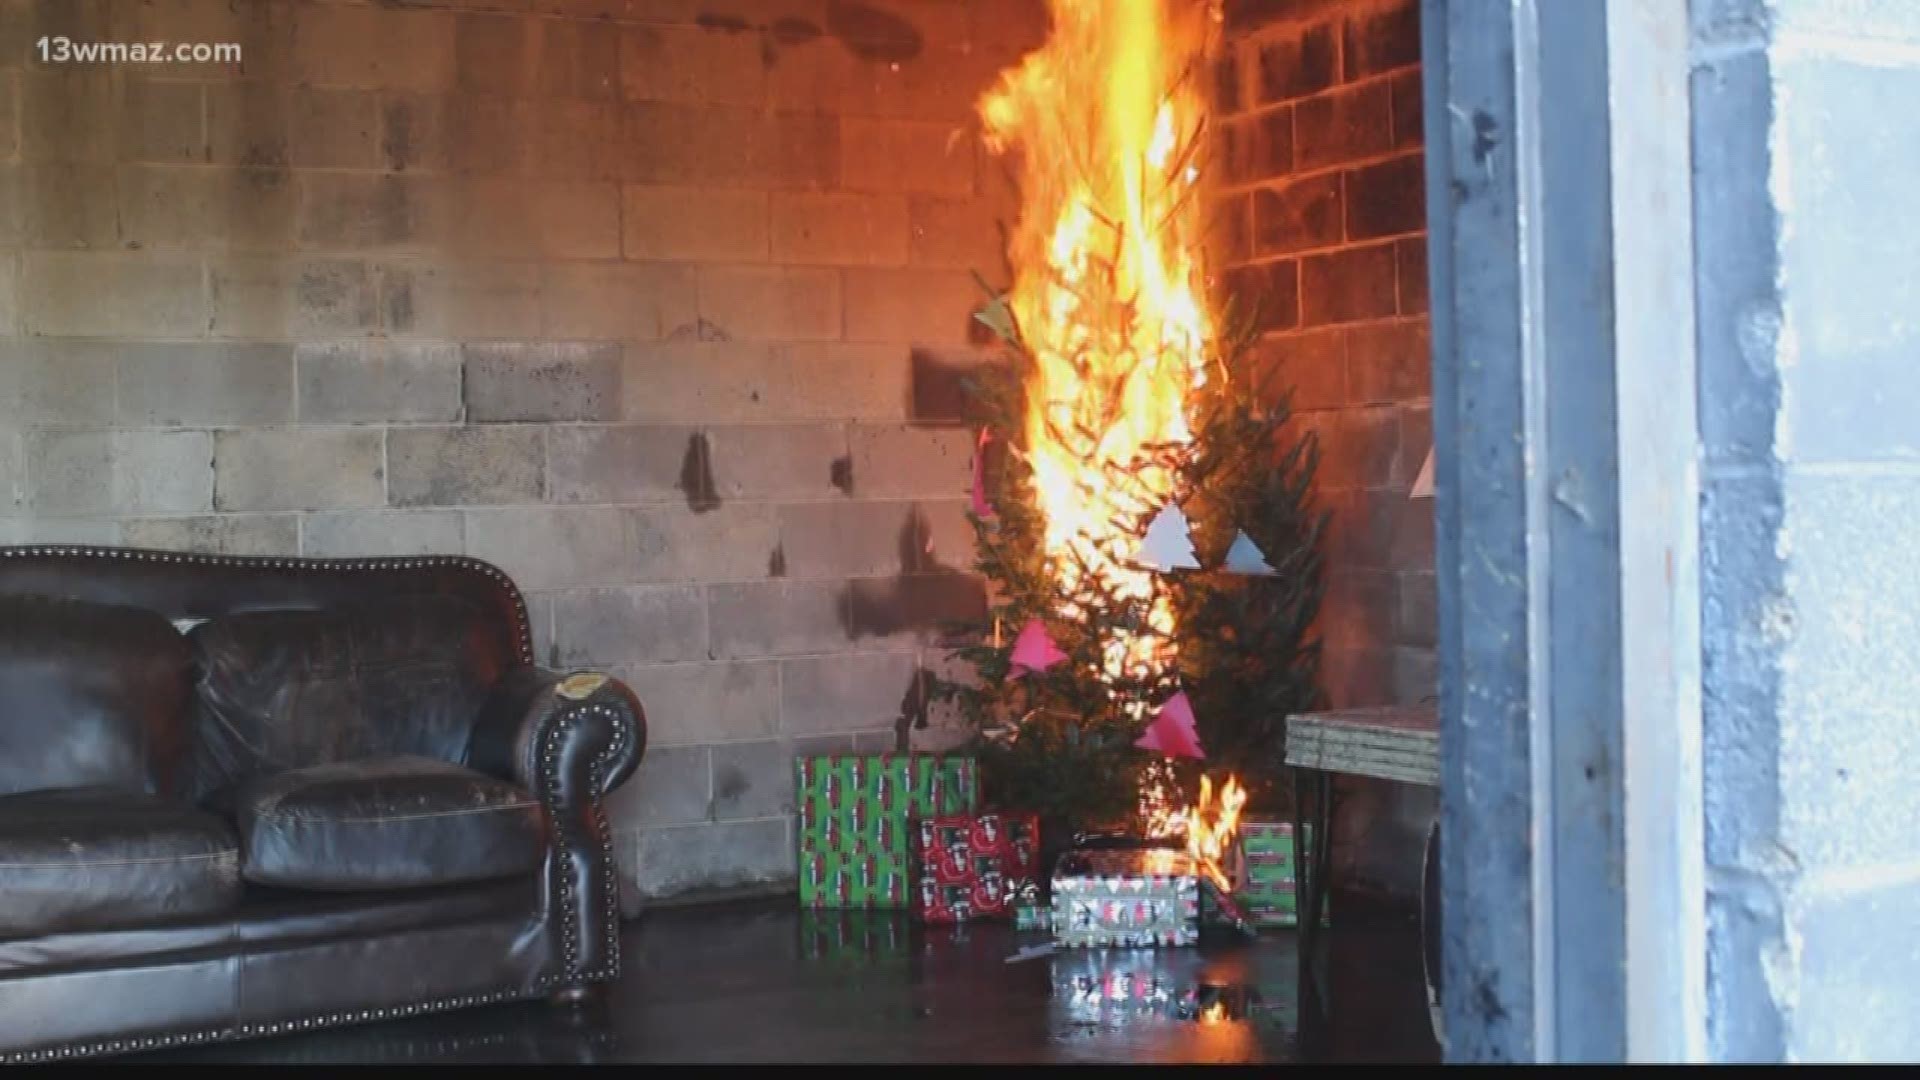 The Macon-Bibb fire department hosted a demonstration to show how fast real, live Christmas trees can go up in flames, if not watered daily.